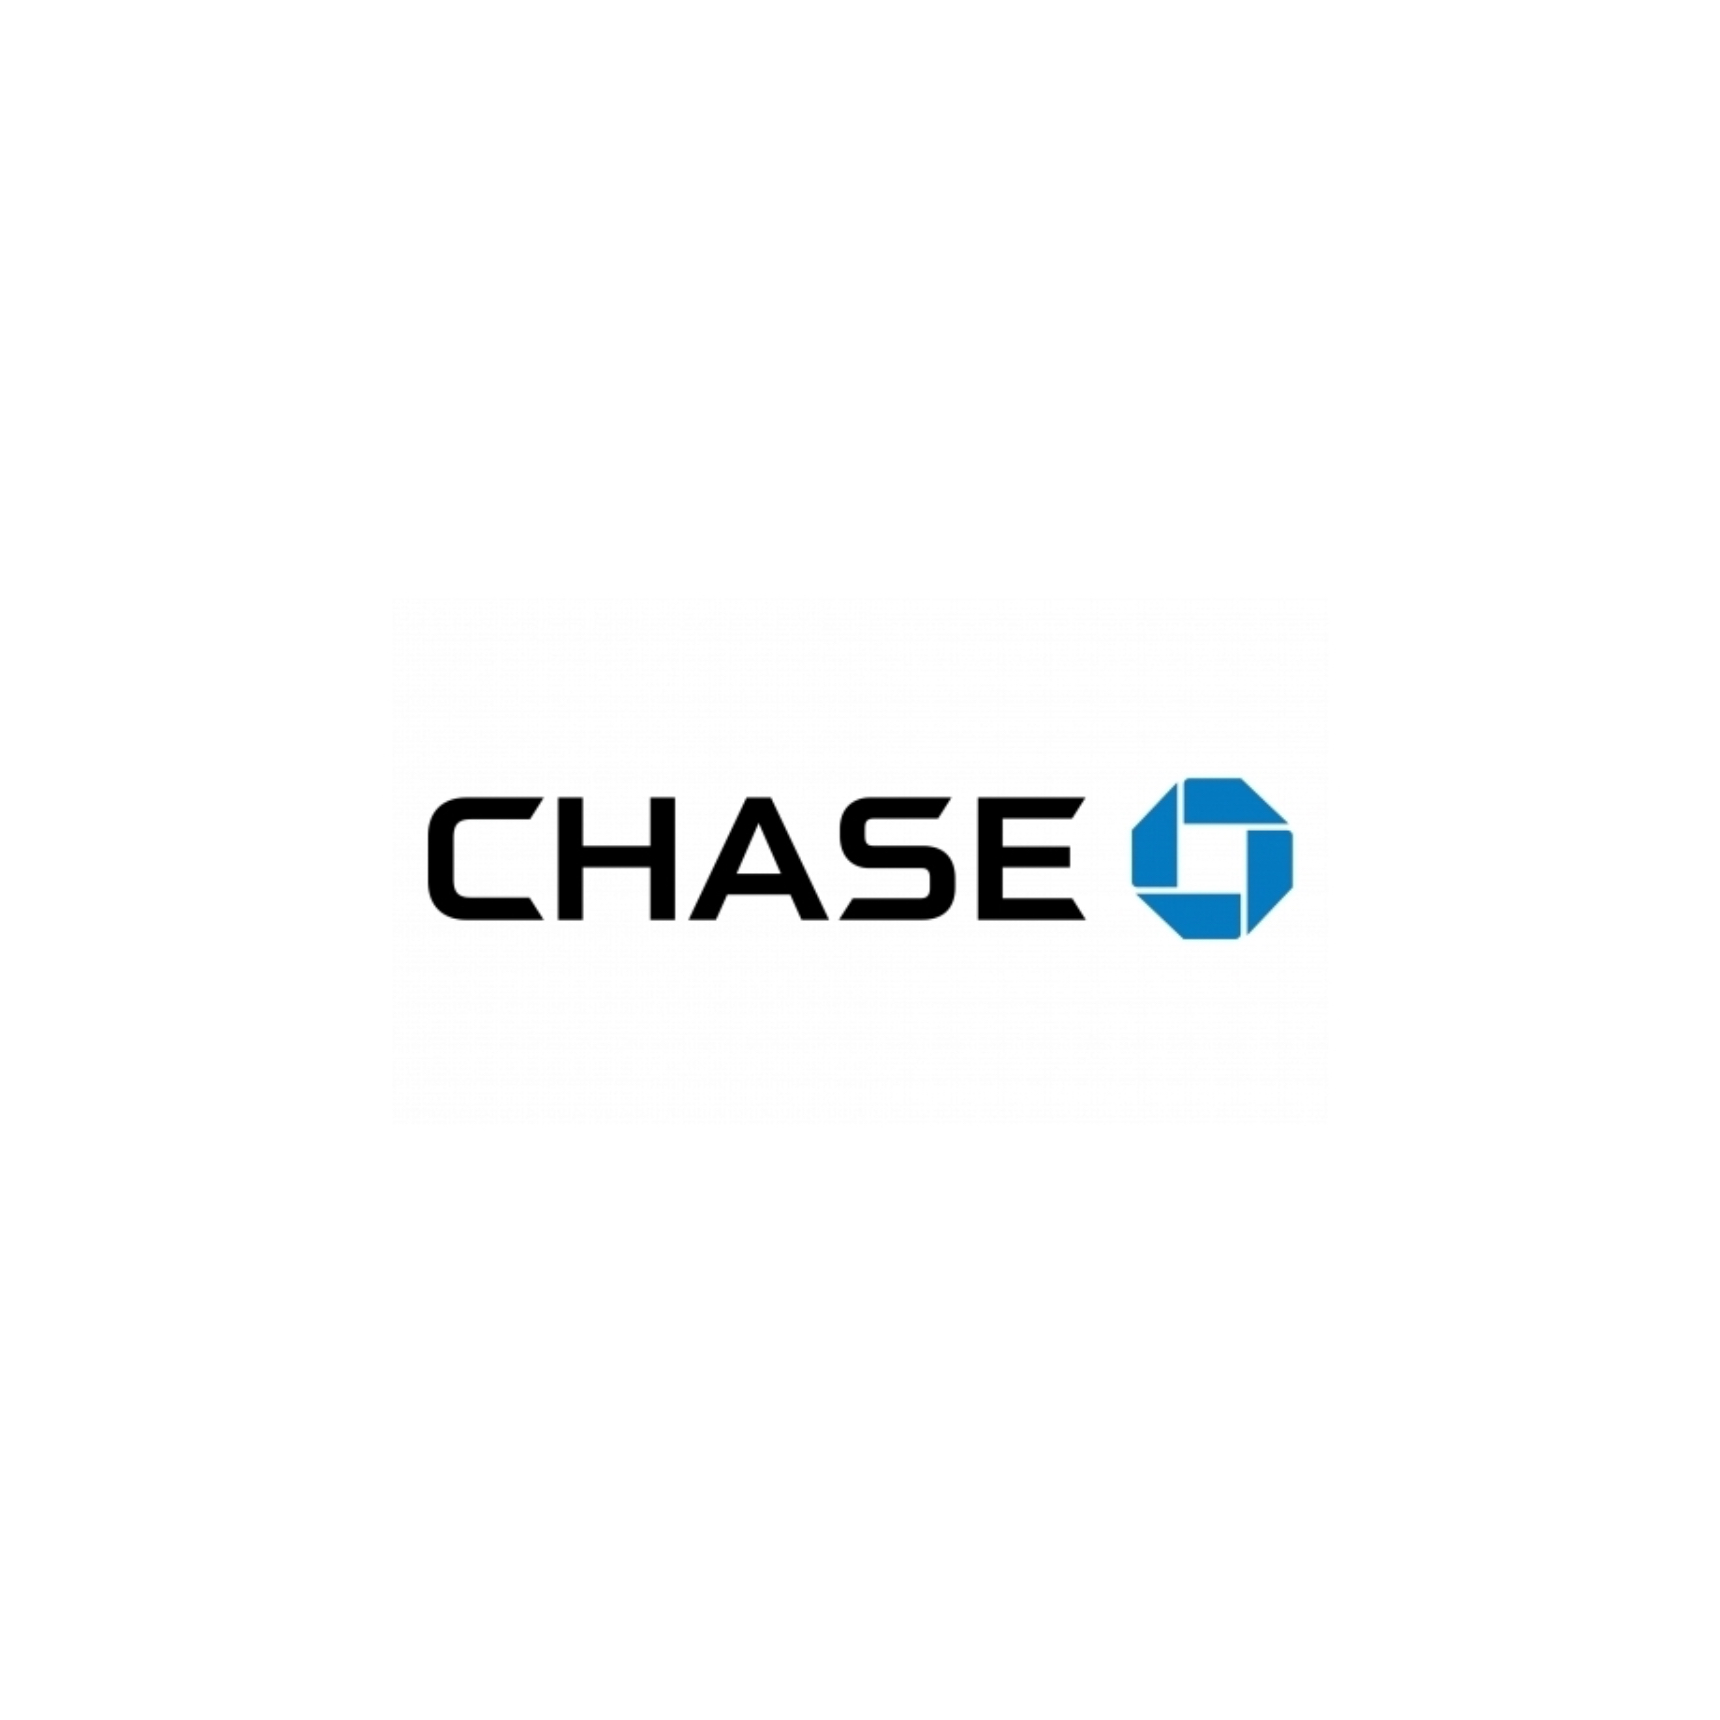 Chase customers left unable to access accounts as app goes down – here's what we know